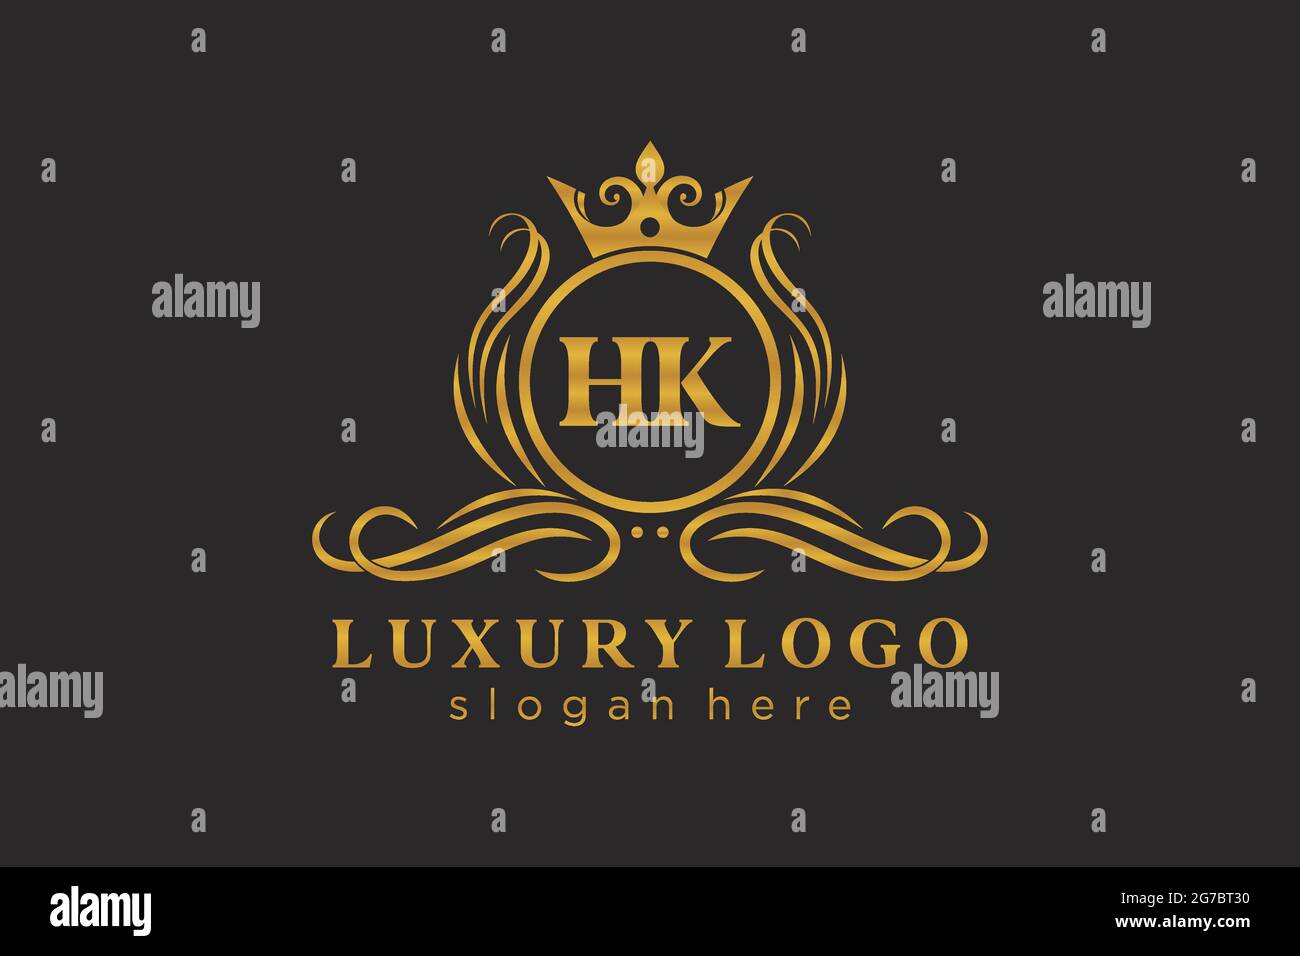 HK Letter Royal Luxury Logo template in vector art for Restaurant, Royalty, Boutique, Cafe, Hotel, Heraldic, Jewelry, Fashion and other vector illustr Stock Vector